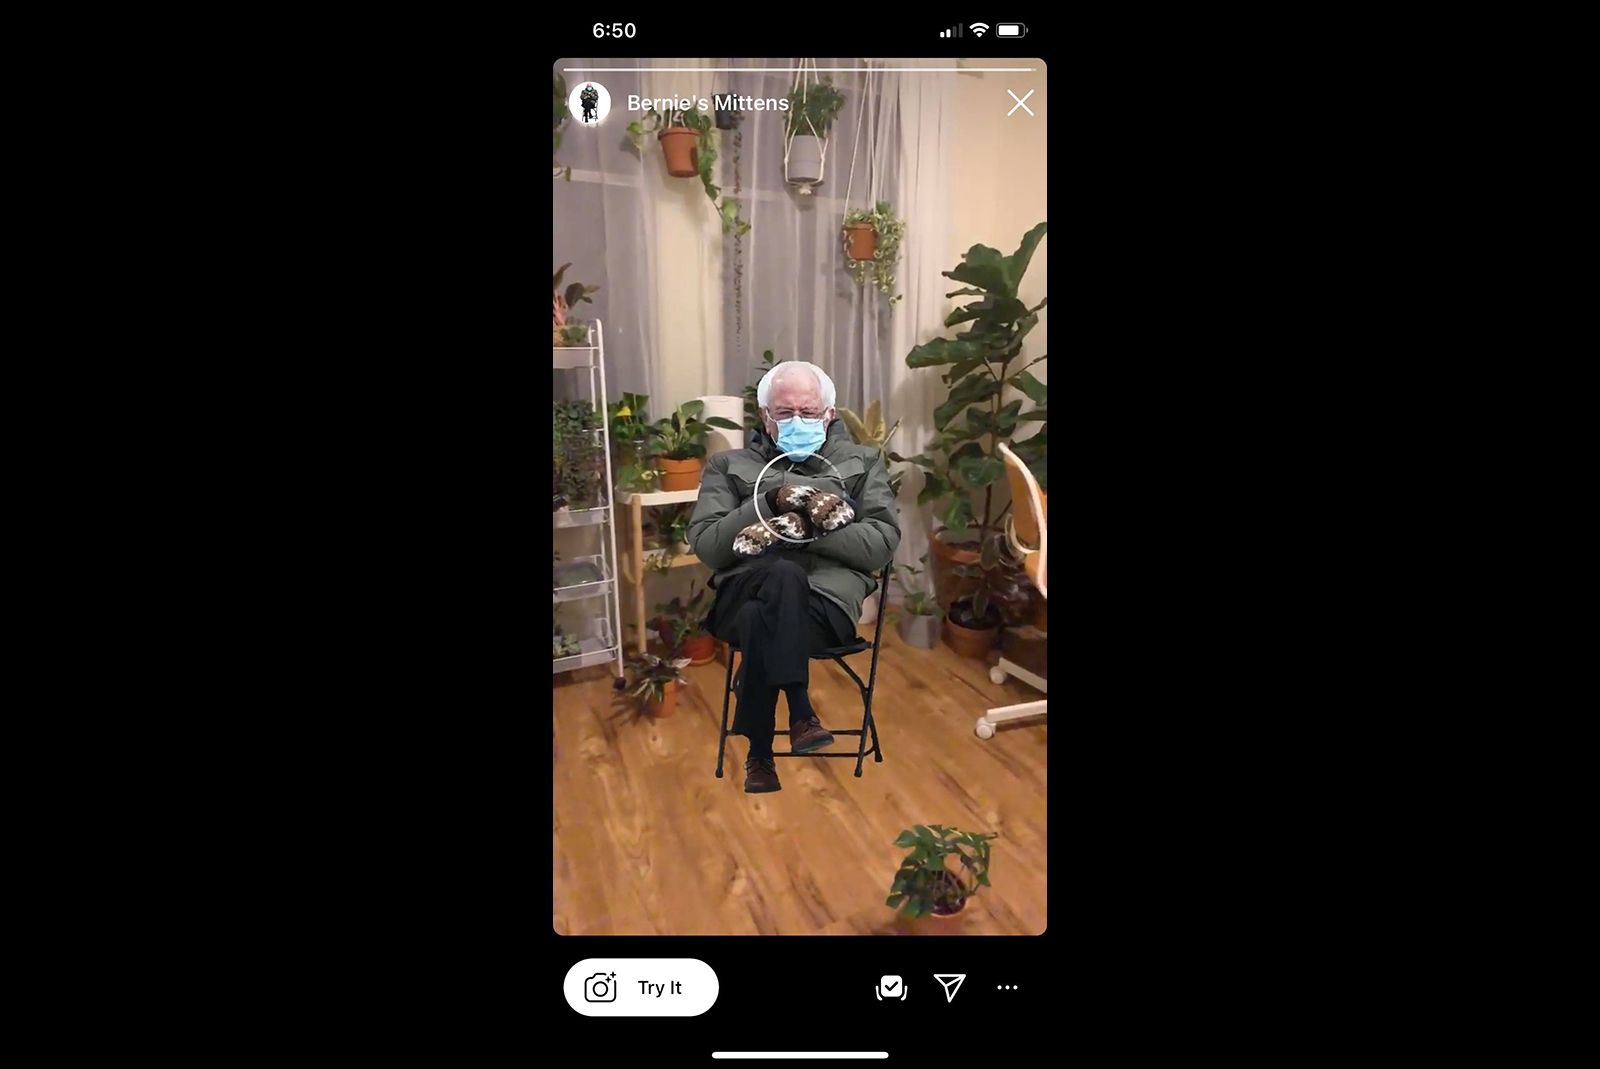 How to make a Bernie Sanders mittens meme with Snap, IG, or Street View photo 2